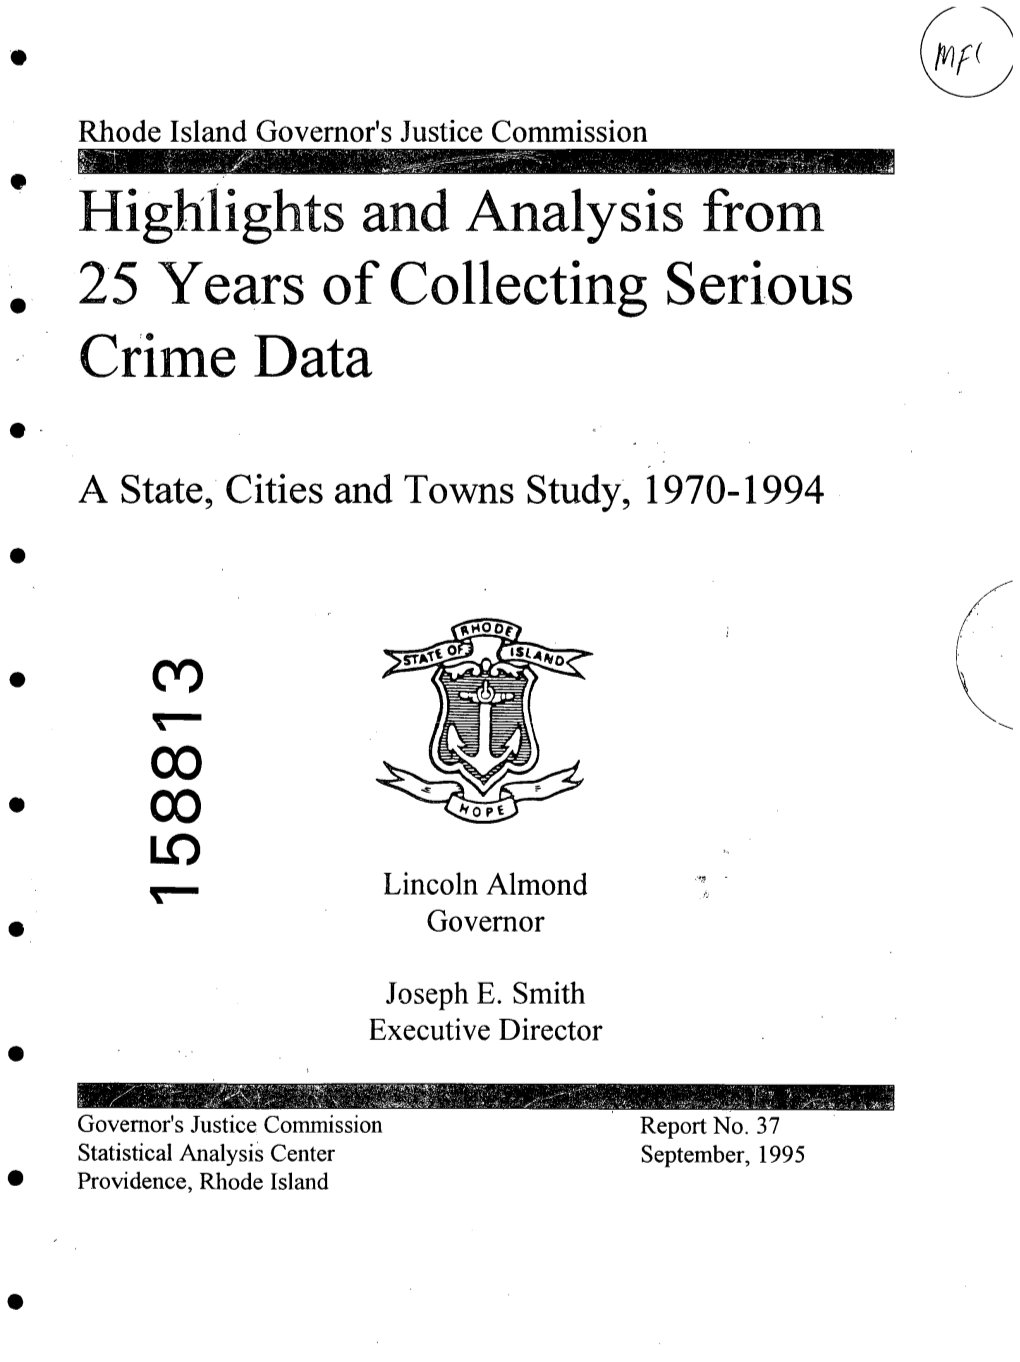 Rhode Island Governor's Justice Commission High, Lights and Analysis from 25 Years of Collecting Serious Crime Data